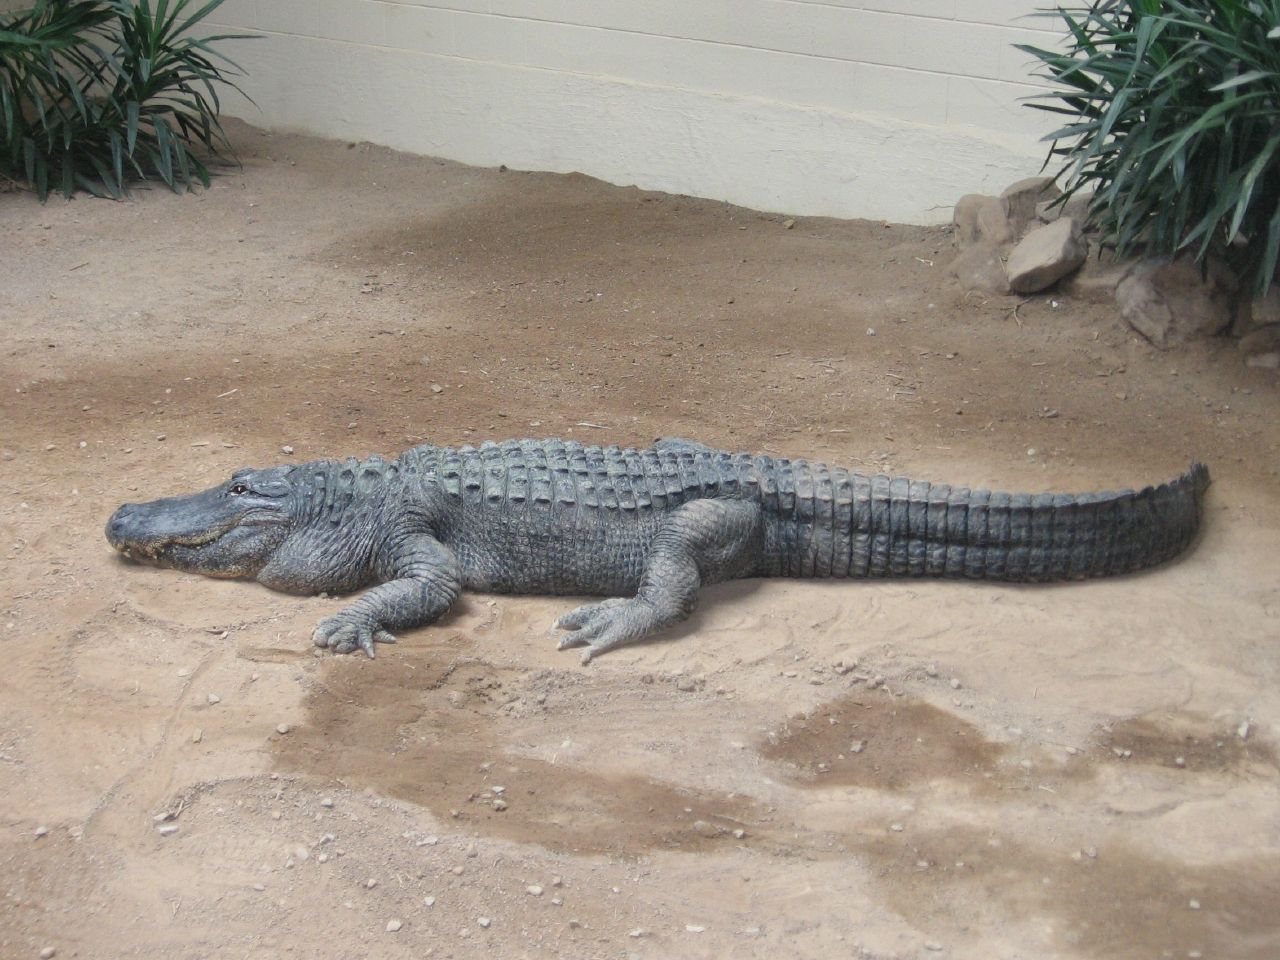 American Aligator at Reptiland in Allenwood, Pennsylvania. Photo by howderfamily.com; (CC BY-NC-SA 2.0)